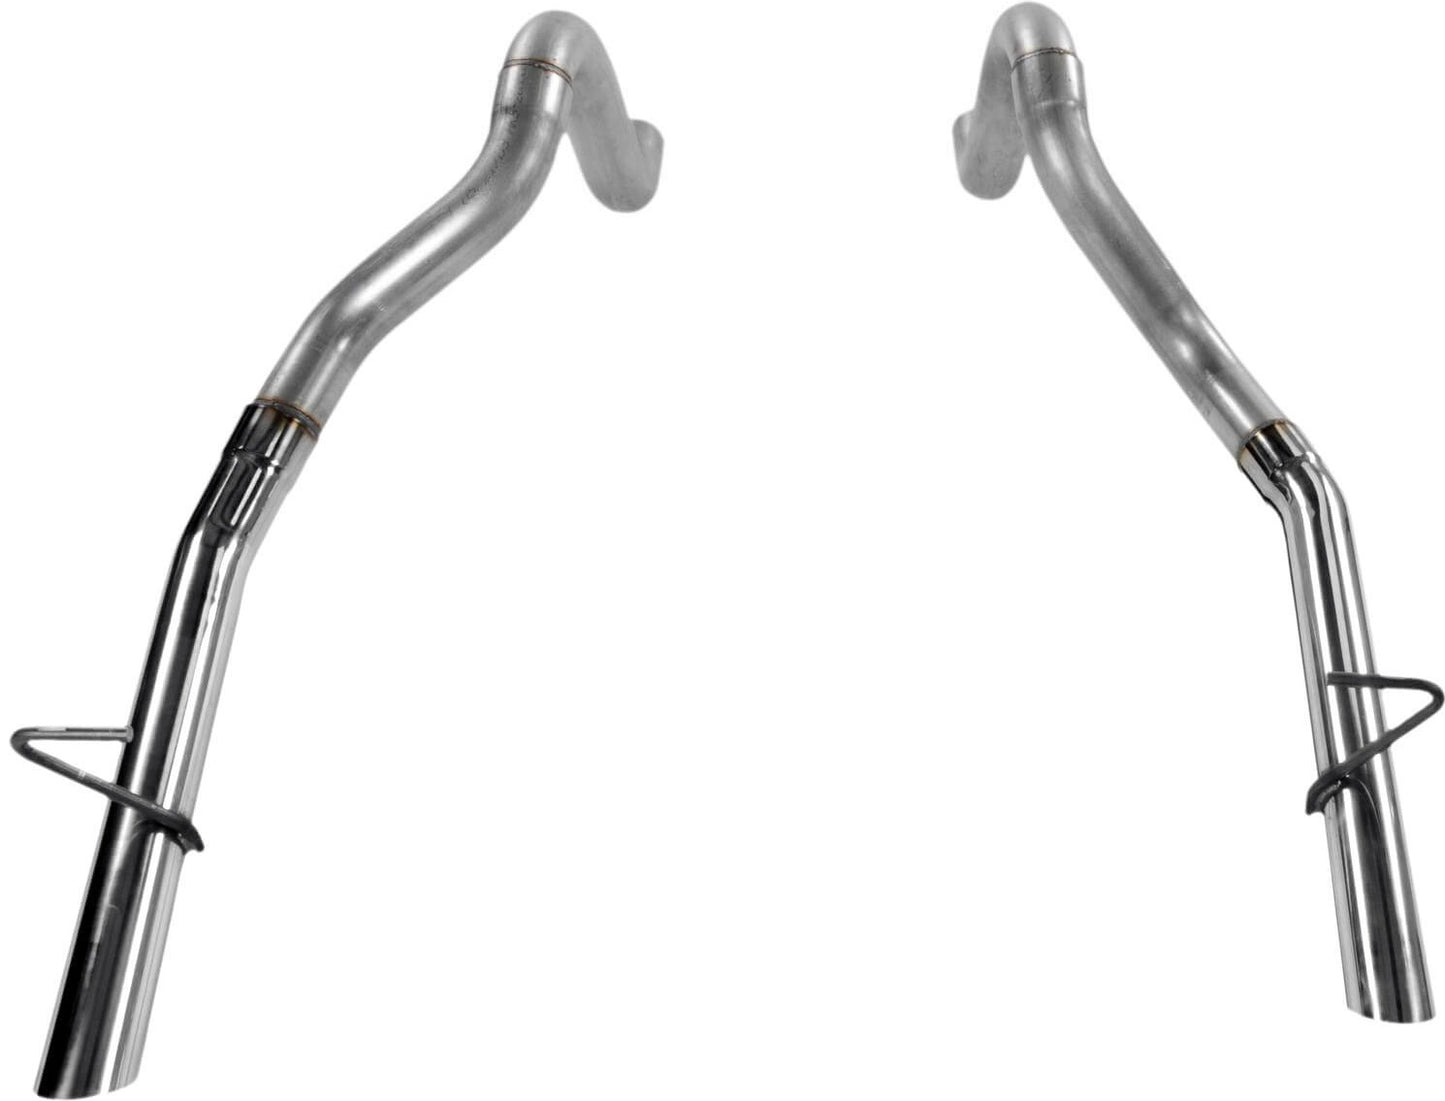 PRE-BENT TAILPIPES,86-93 MUSTANG 5.0,STAINLESS STEEL